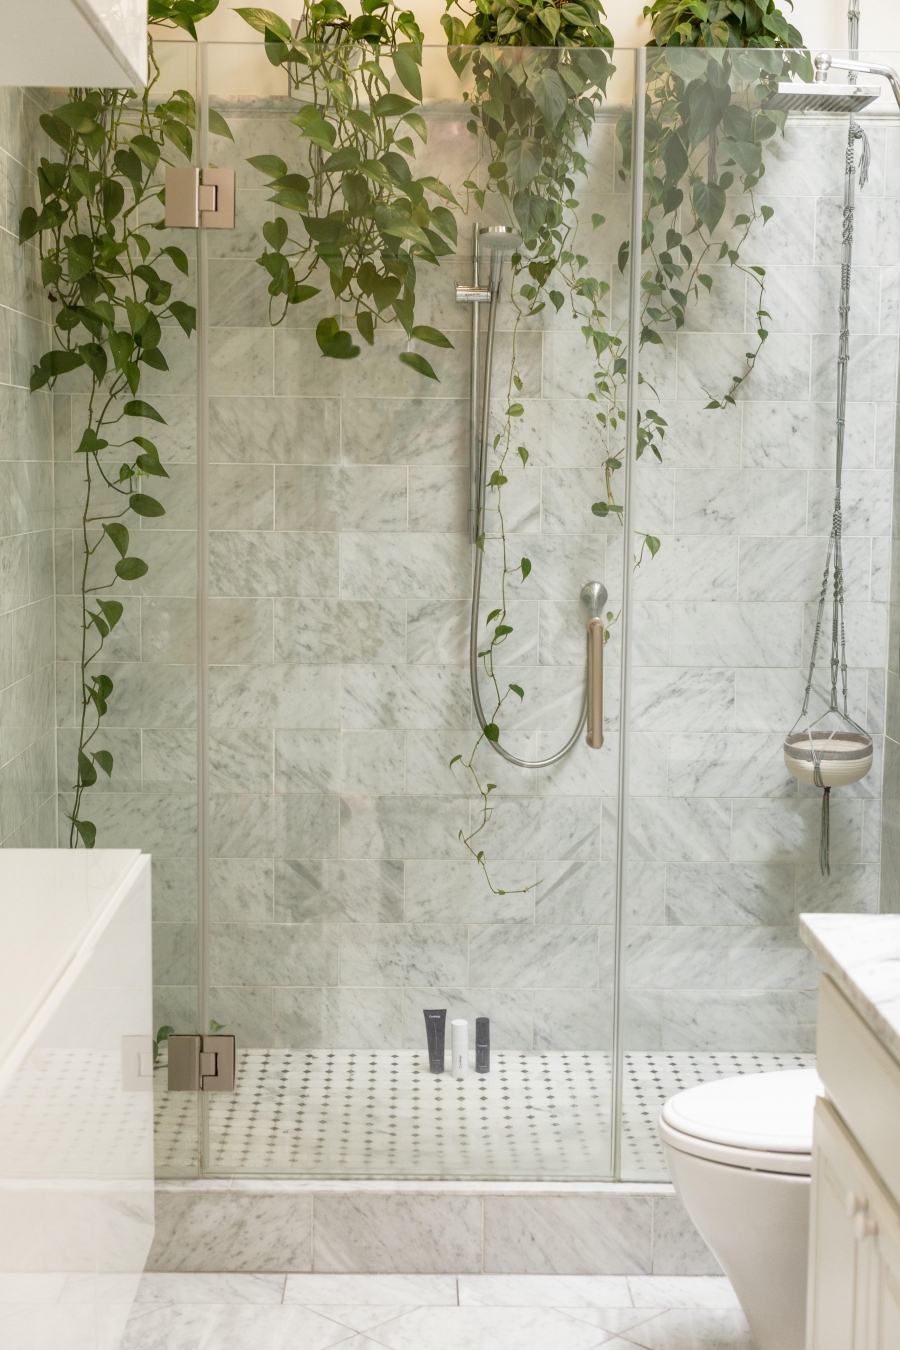 4 Ways To Reduce Water and Electricity Usage In Your Bathroom